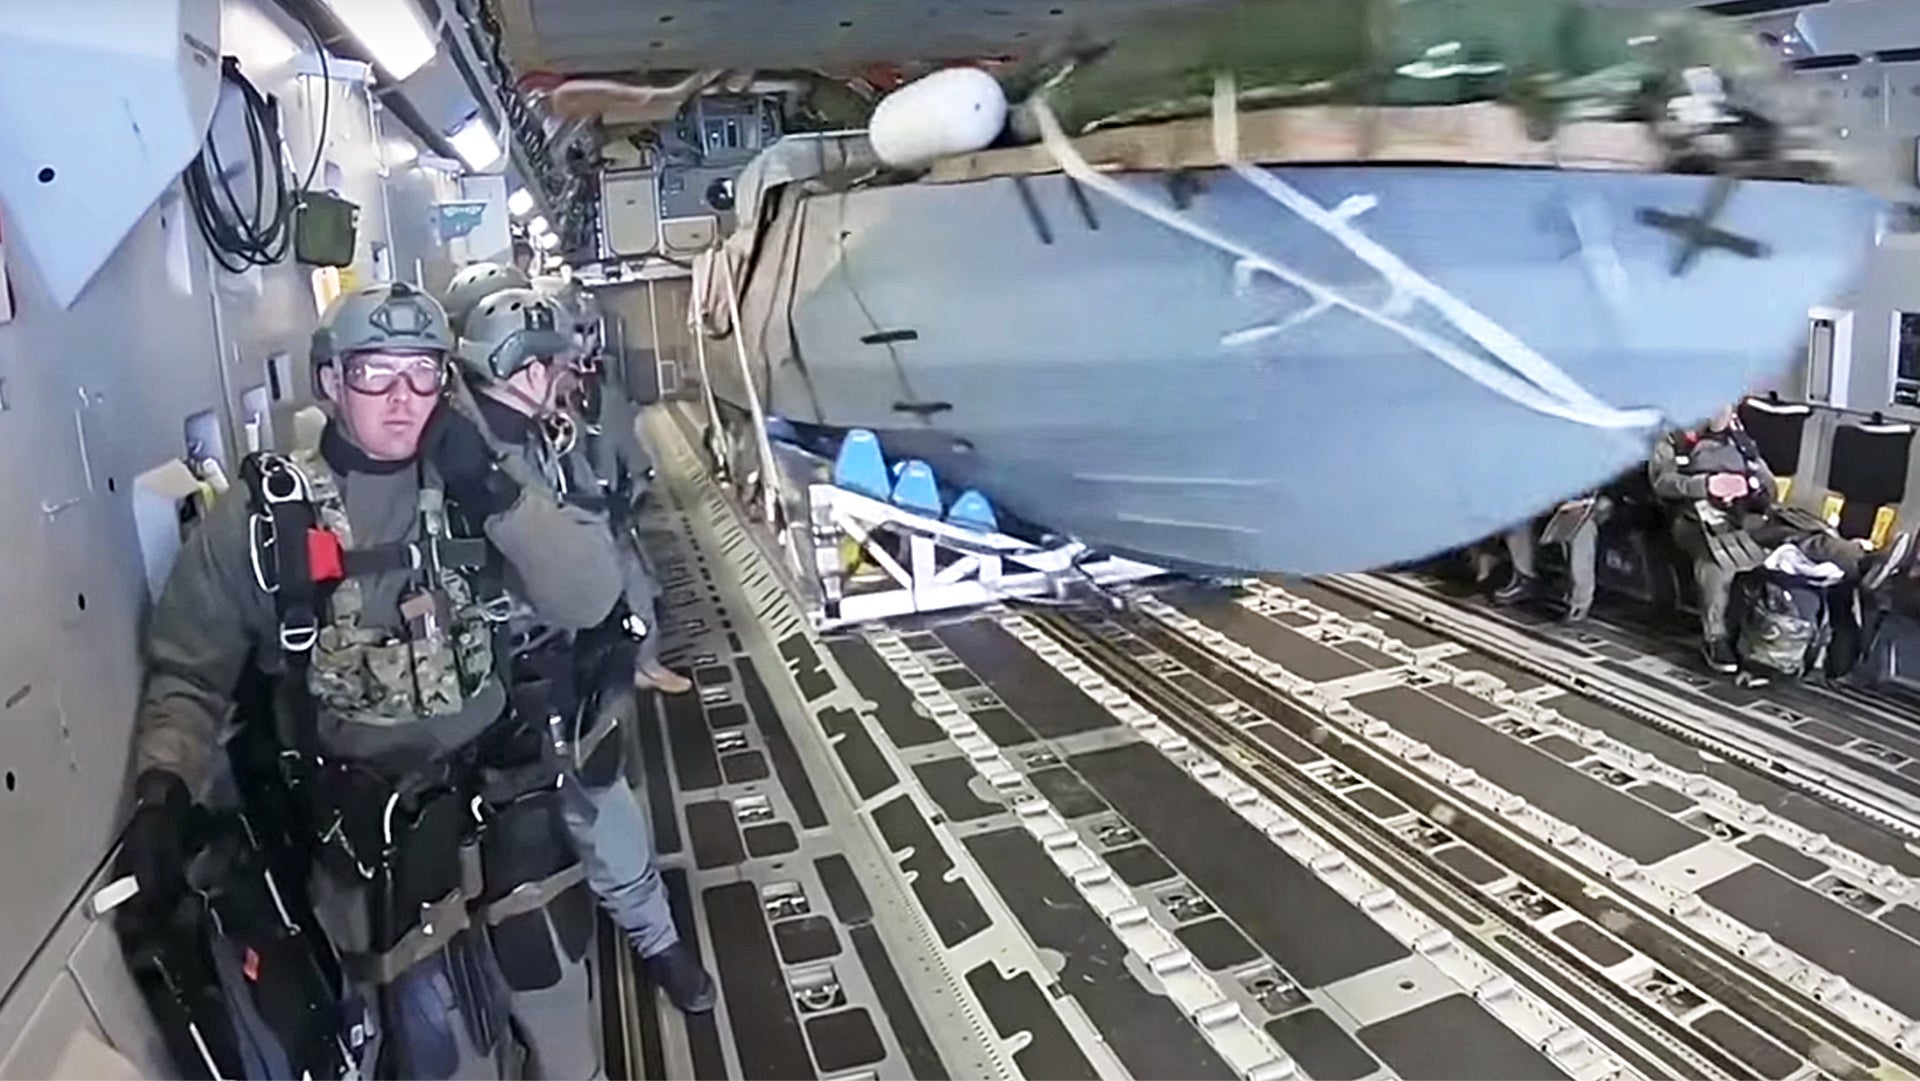 Watch This Special Ops Team Toss Their Stealthy Boats And Themselves Out Of A C-17